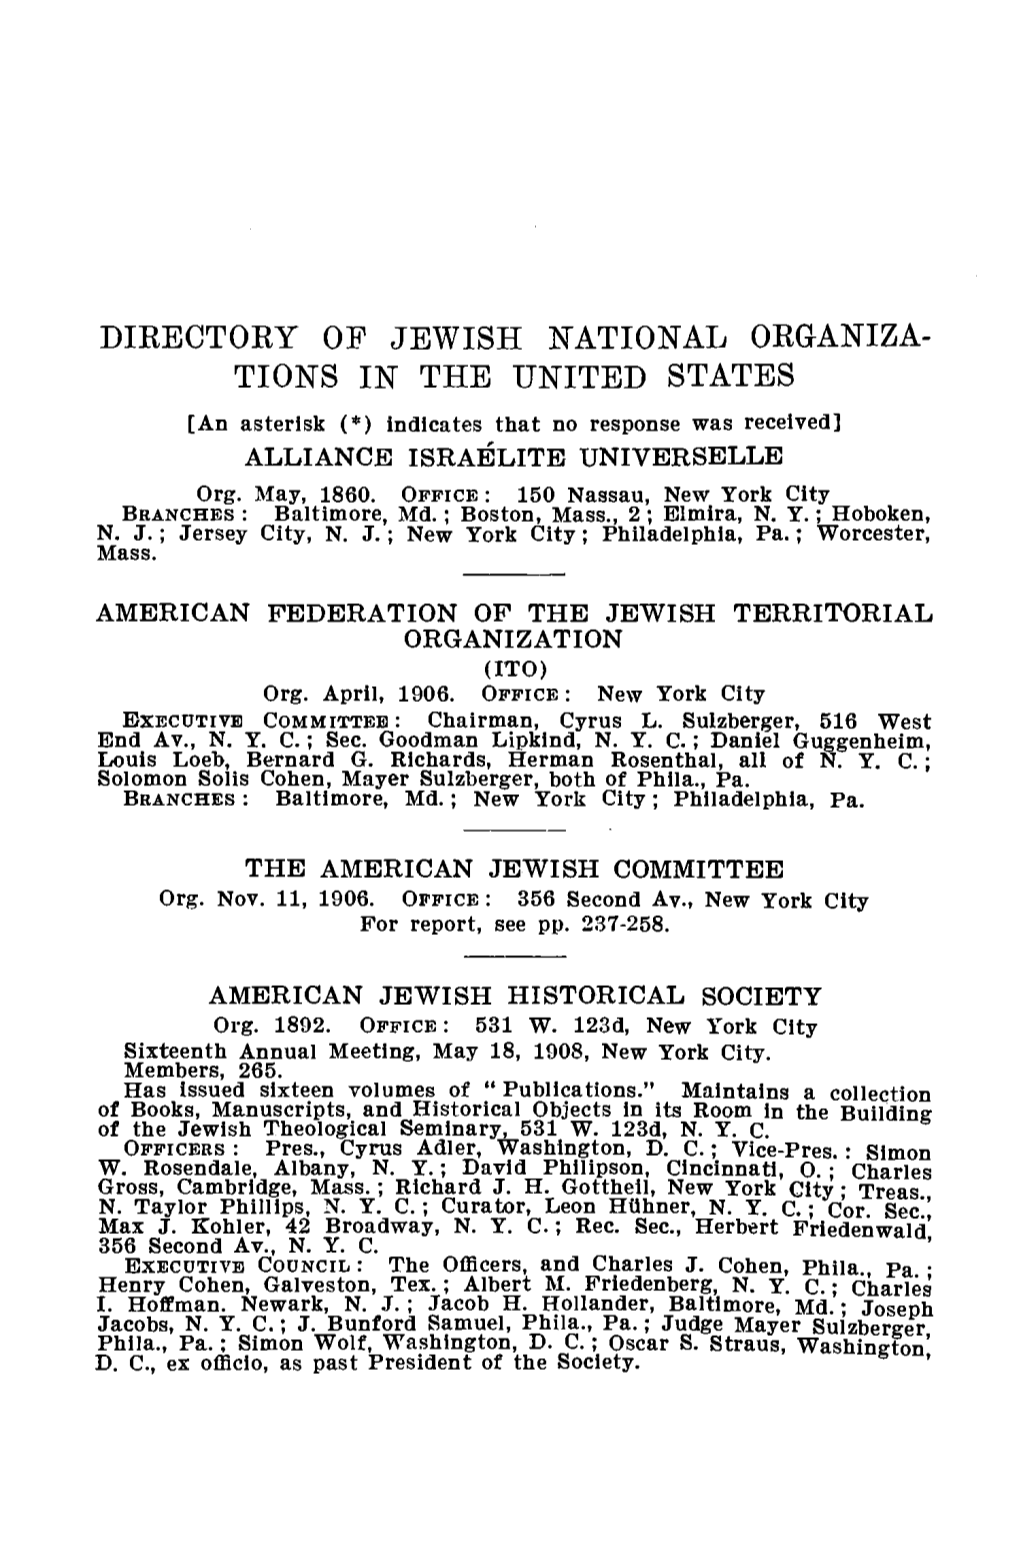 DIEBCTOEY of JEWISH NATIONAL OEGANIZA- TIONS in the UNITED STATES [An Asterisk (*) Indicates That No Response Was Received] ALLIANCE ISRAELITE UNIVERSELLE Org